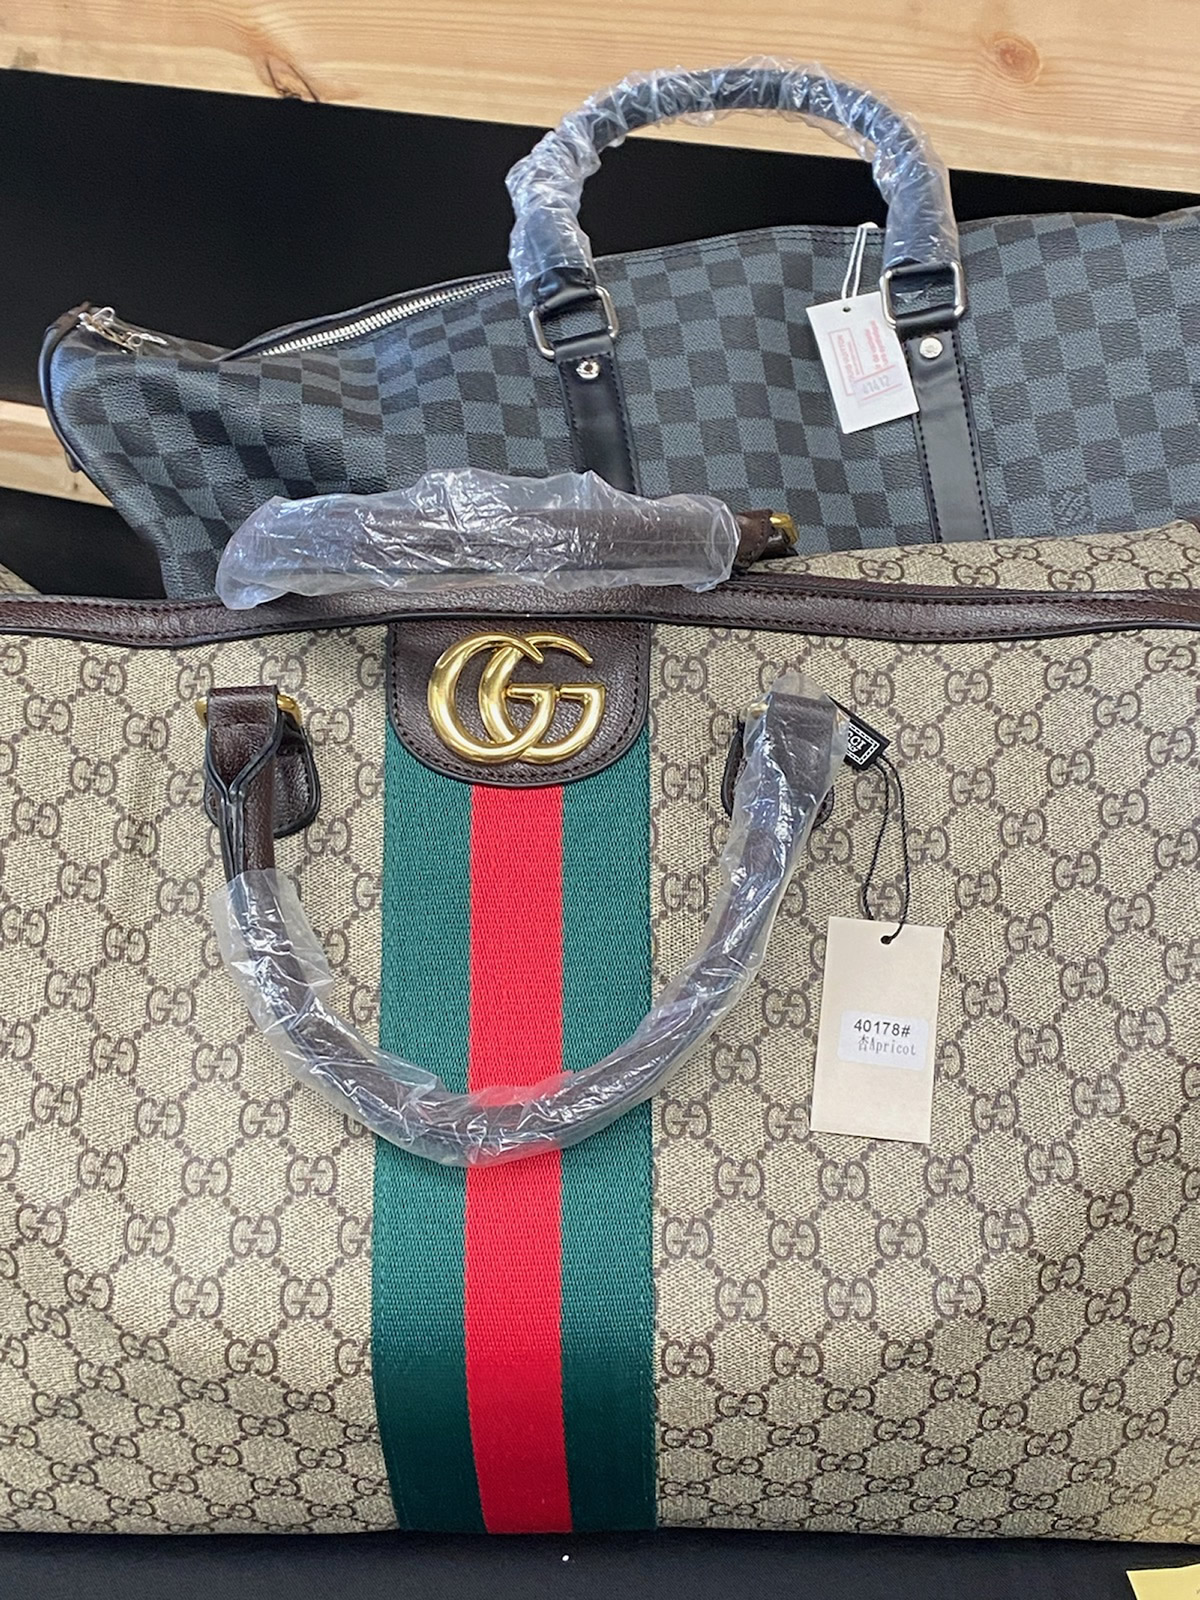 Over 1,000 items were confiscated, including several boxes of luxury designer goods such as high-end purses, caps, shoes and sunglasses.